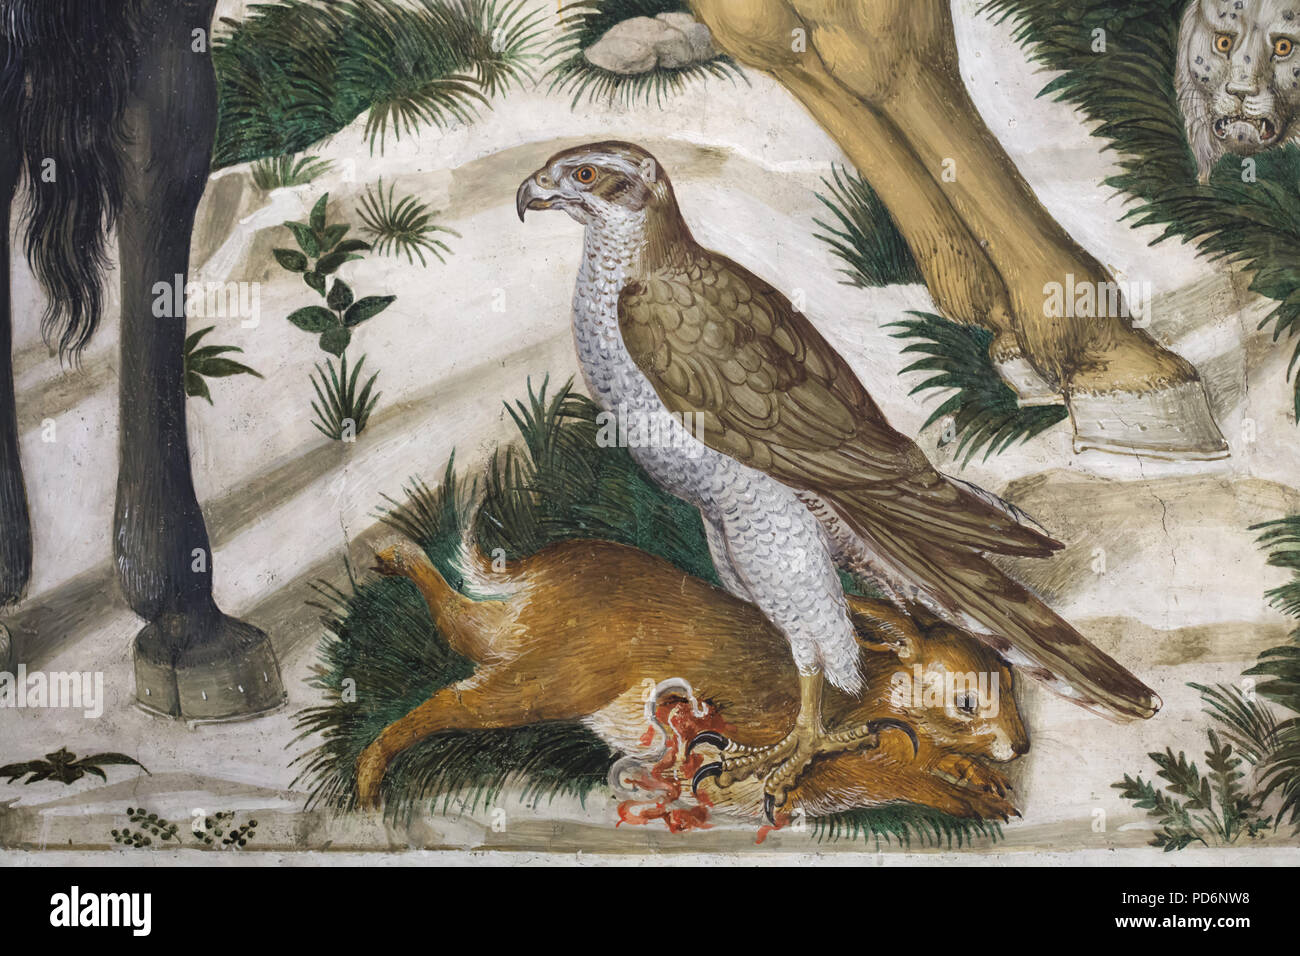 Goshawk and hare depicted in the mural by Italian Renaissance painter Benozzo Gozzoli in the Magi Chapel in the Palazzo Medici Riccardi in Florence, Tuscany, Italy. Northern goshawk (Accipiter gentilis) is depicted in the mural. Stock Photo